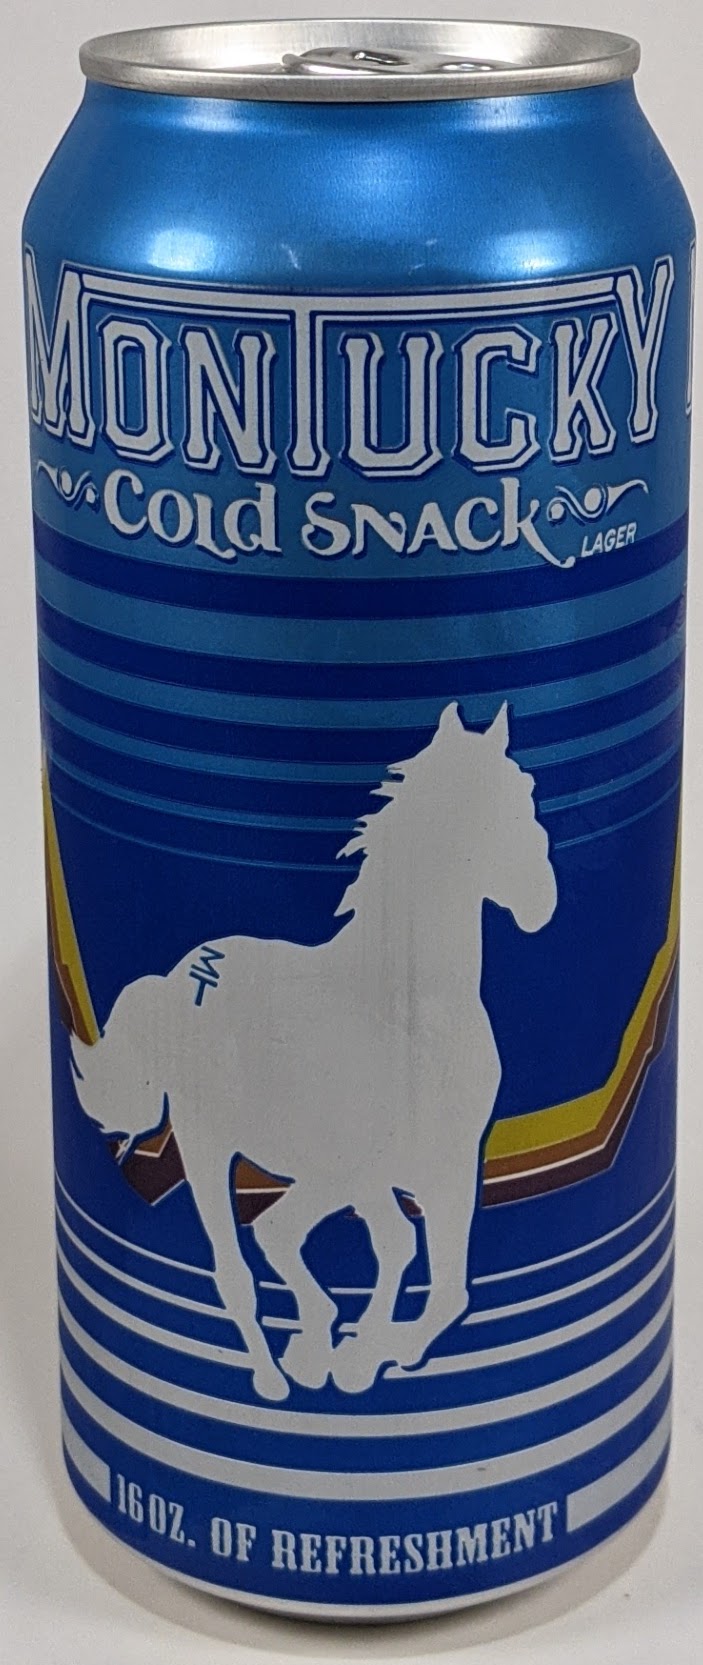 Montucky Cold Snack 16oz can